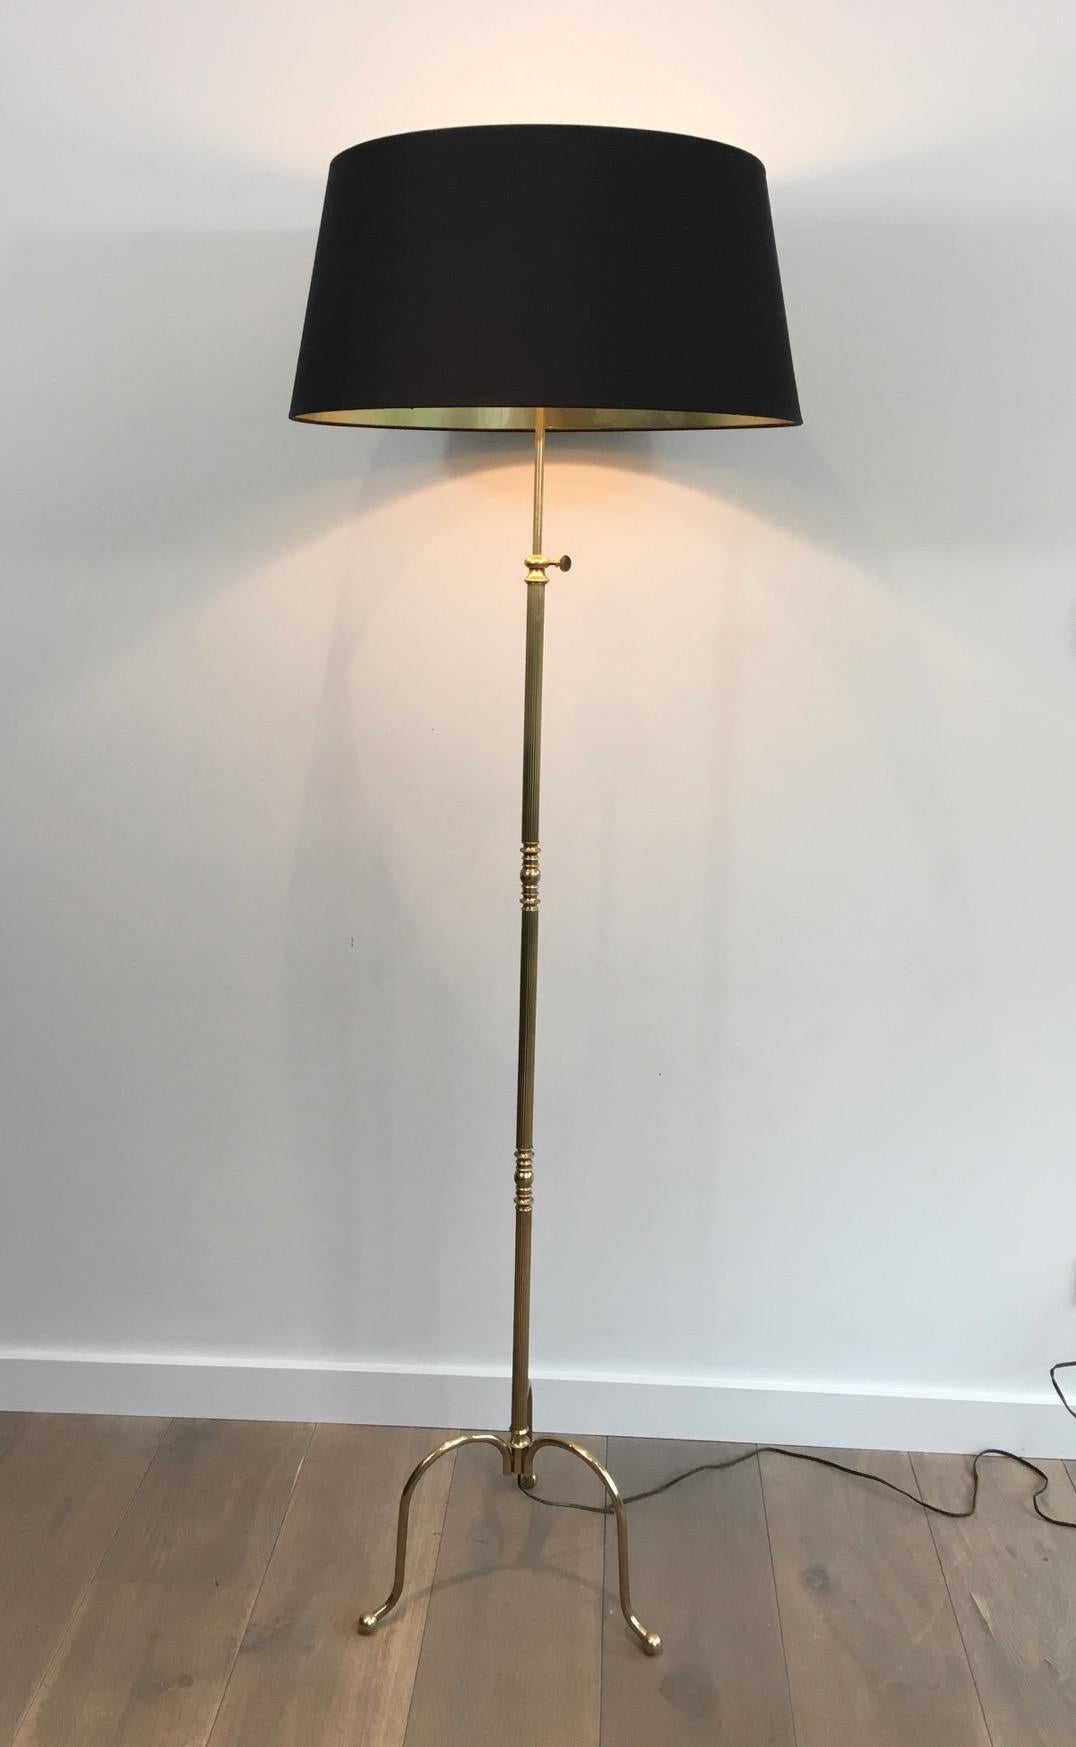 This neoclassical floor lamp is made of brass. It has a tripode base, decorations on the central brass part and is adjustable so can be lower or higher as needed. This is a French work, in the style of famous French Maison Jansen, circa 1940.